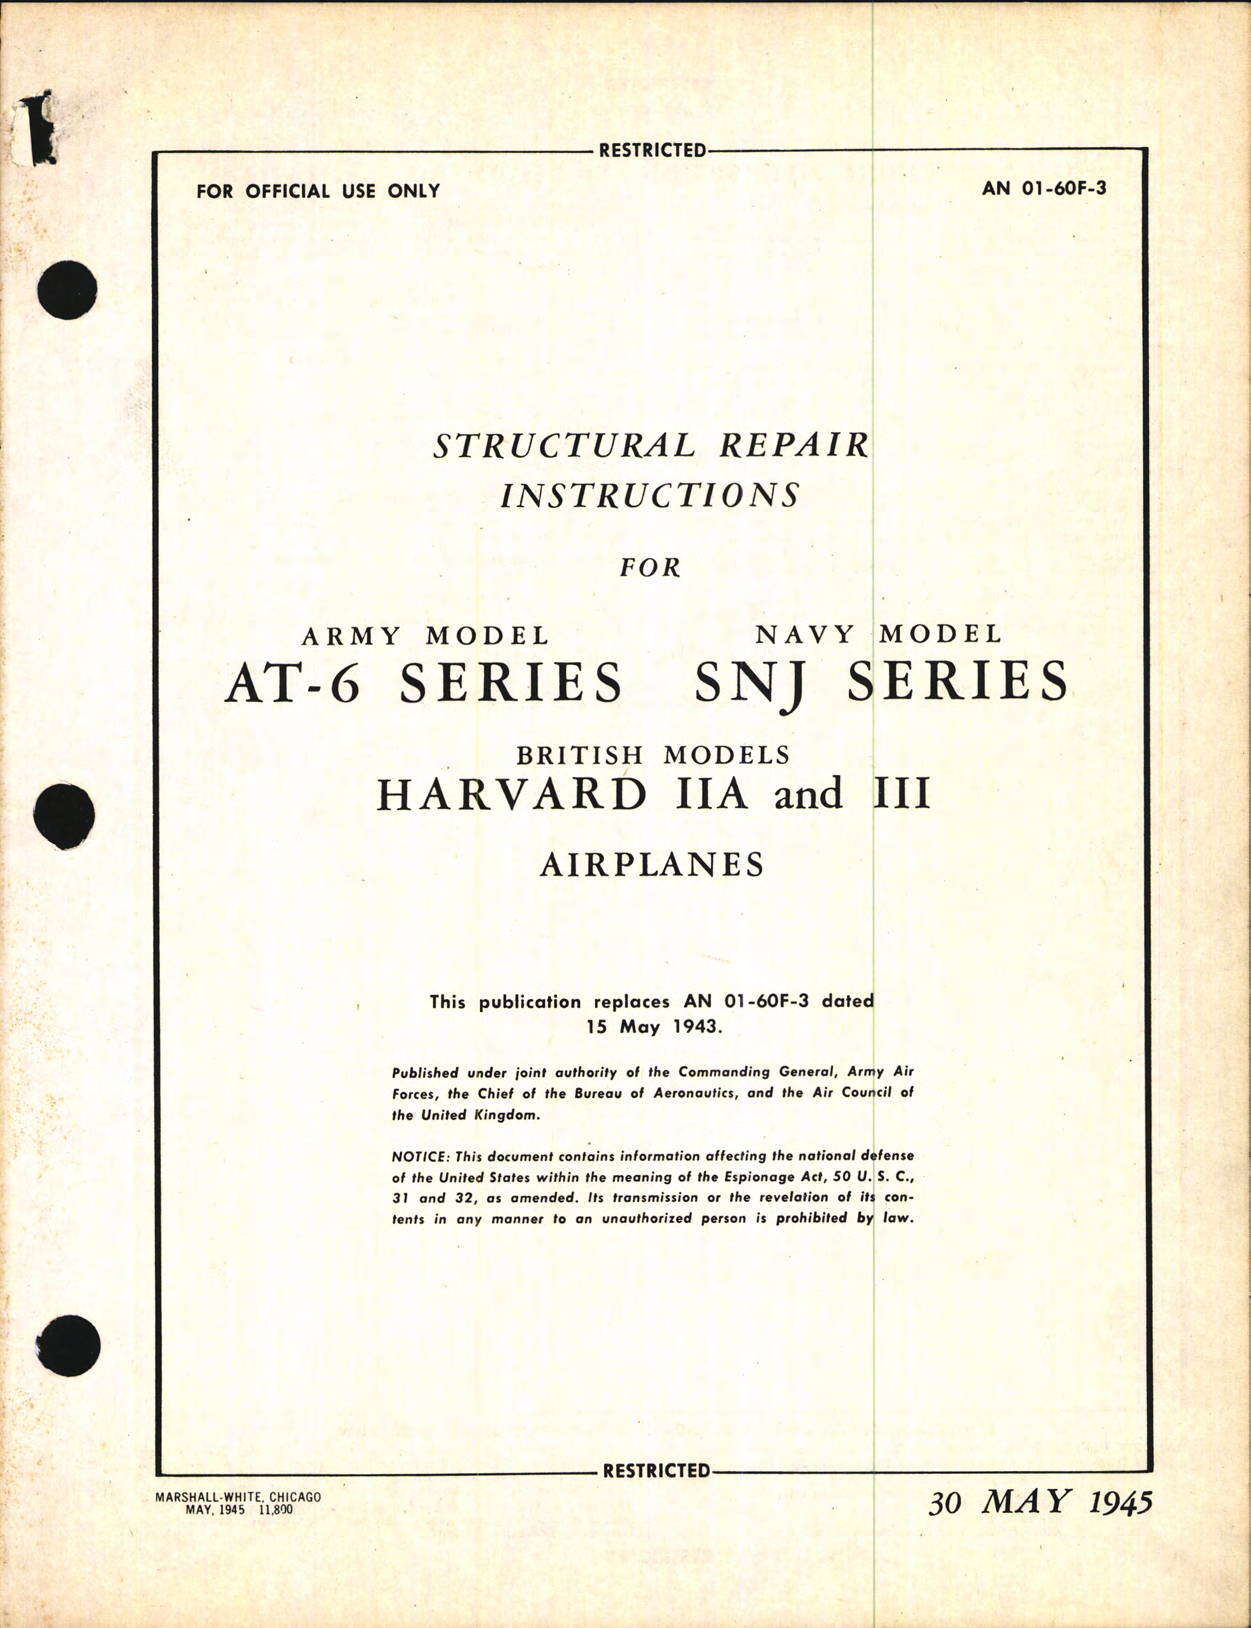 Sample page 1 from AirCorps Library document: Structural Repair Instructions for AT-6 and SNJ Series (Harvard IIA and III)